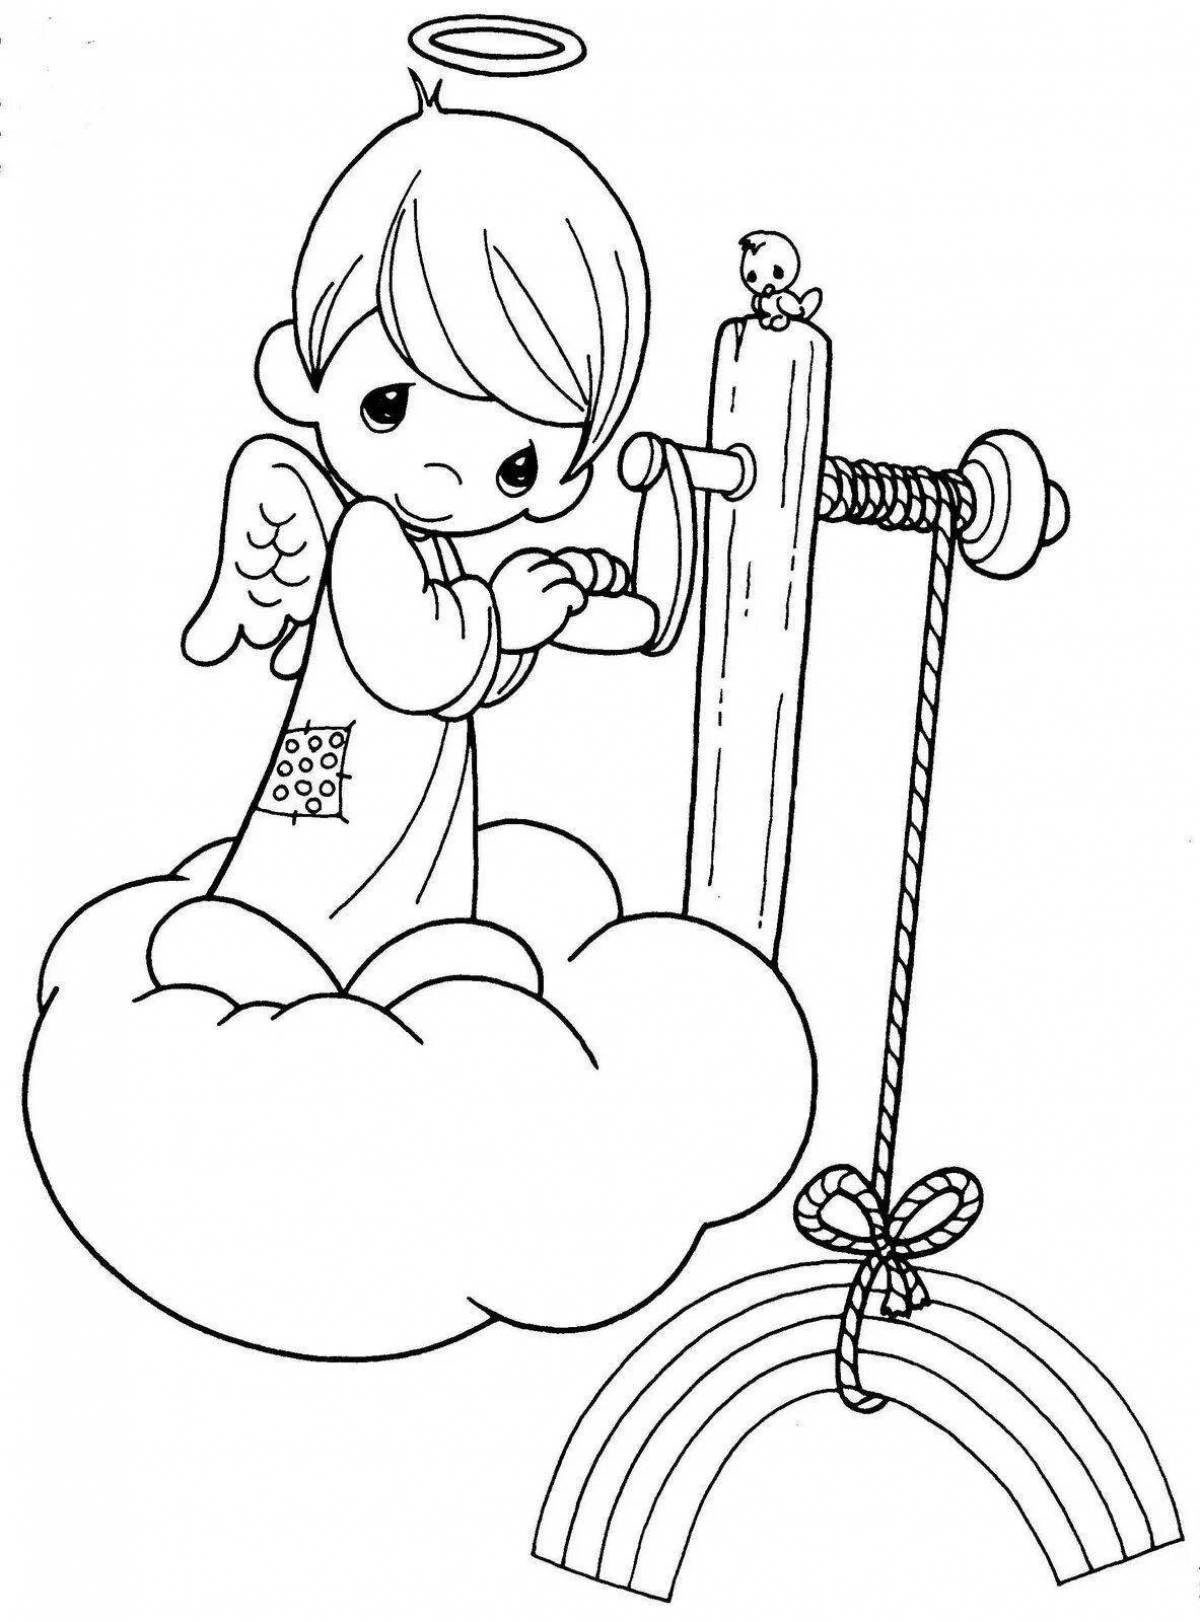 Attractive tube coloring page